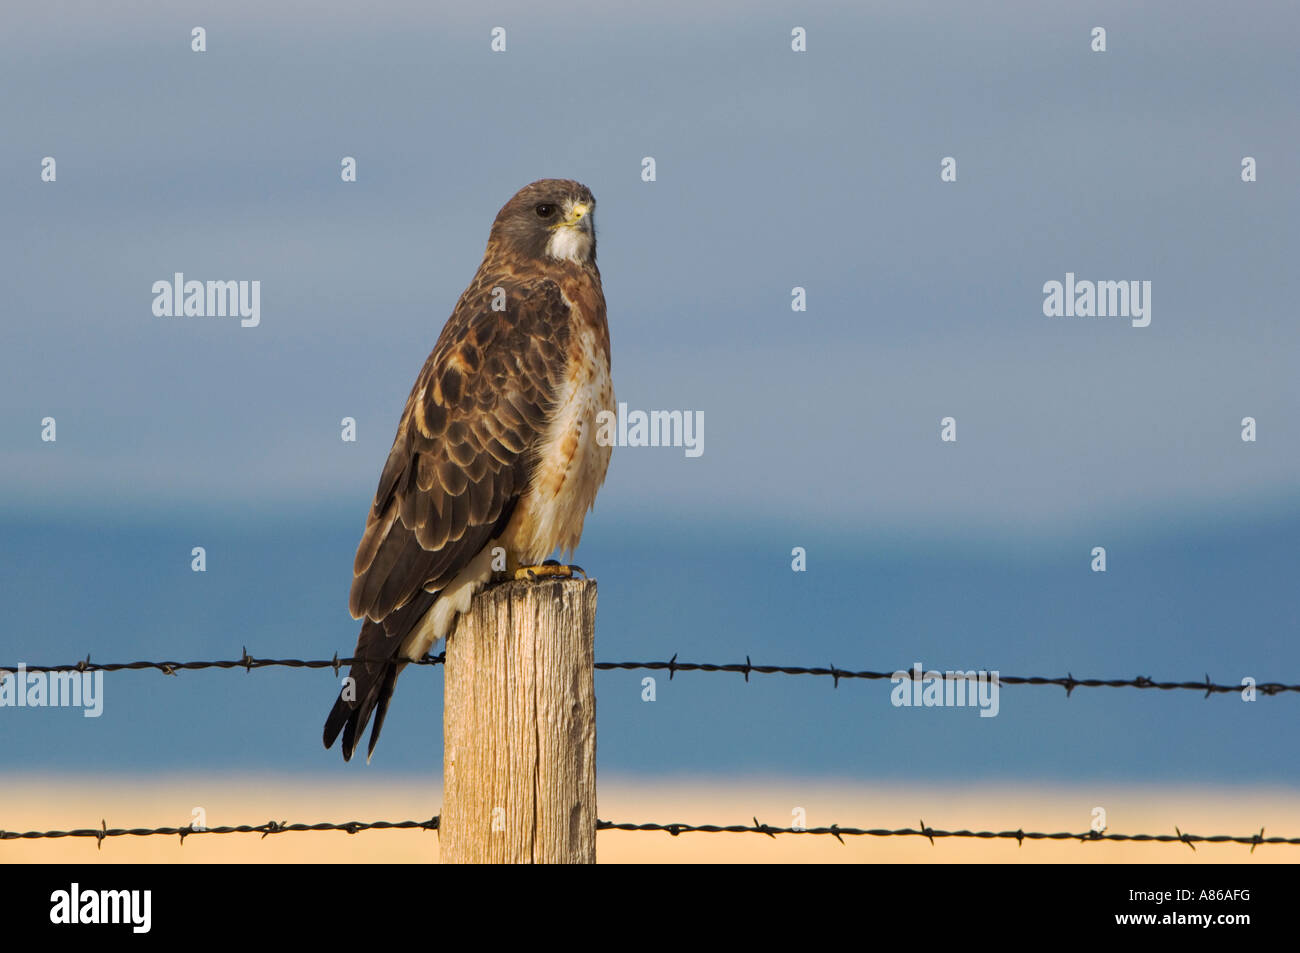 Swainson's Hawk Buteo swainsoni adult on fence post after rainstorm Rocksprings Wyoming September 2005 Stock Photo